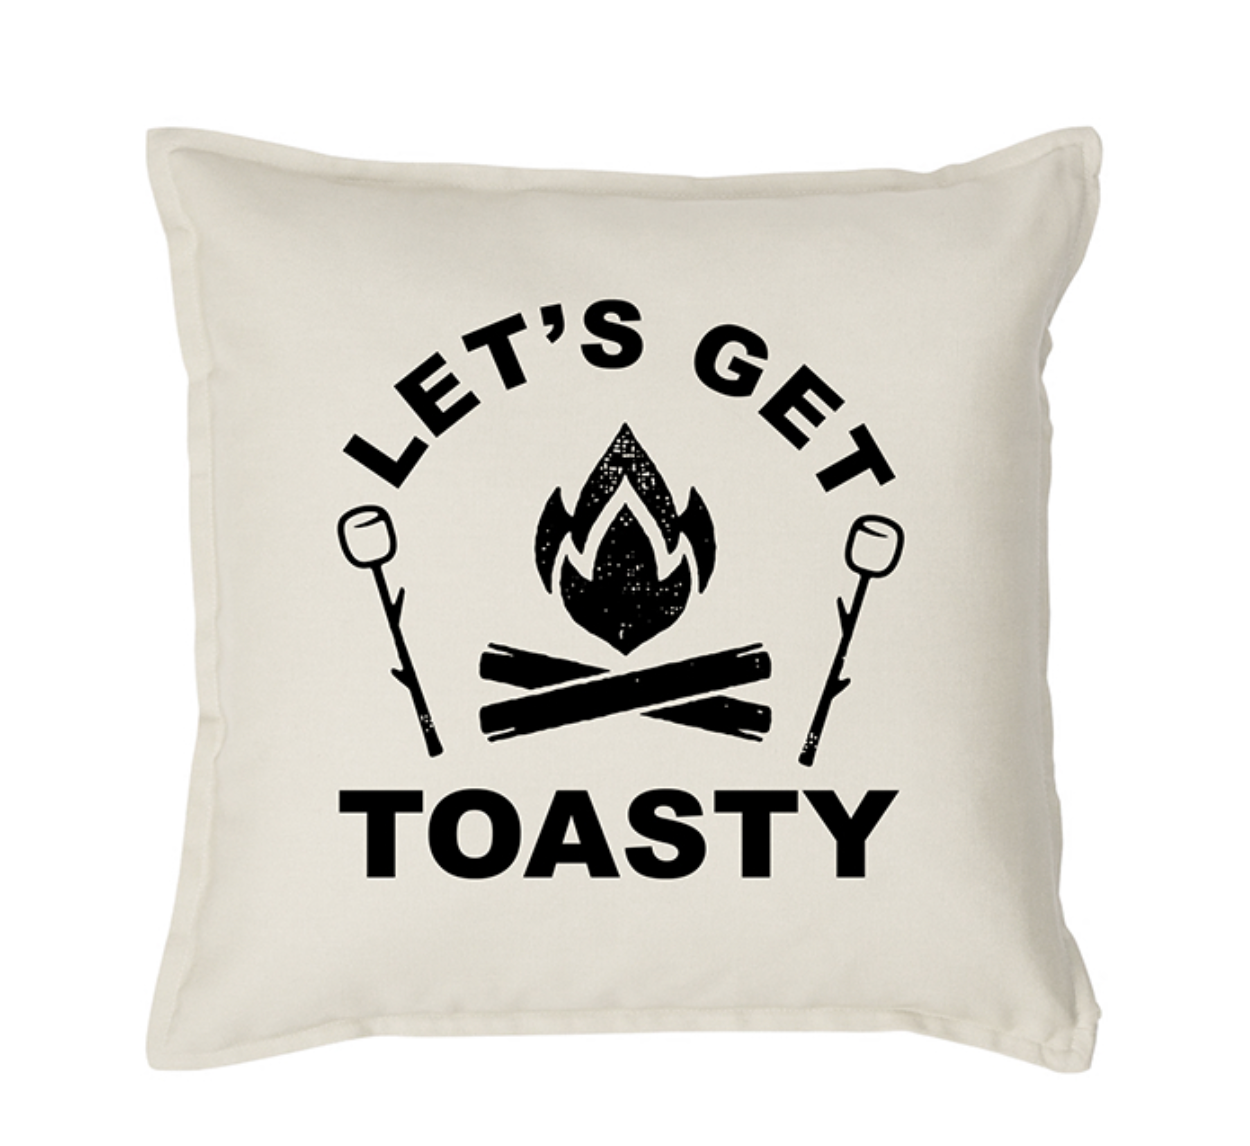 Lets Get Toasty Throw Pillow